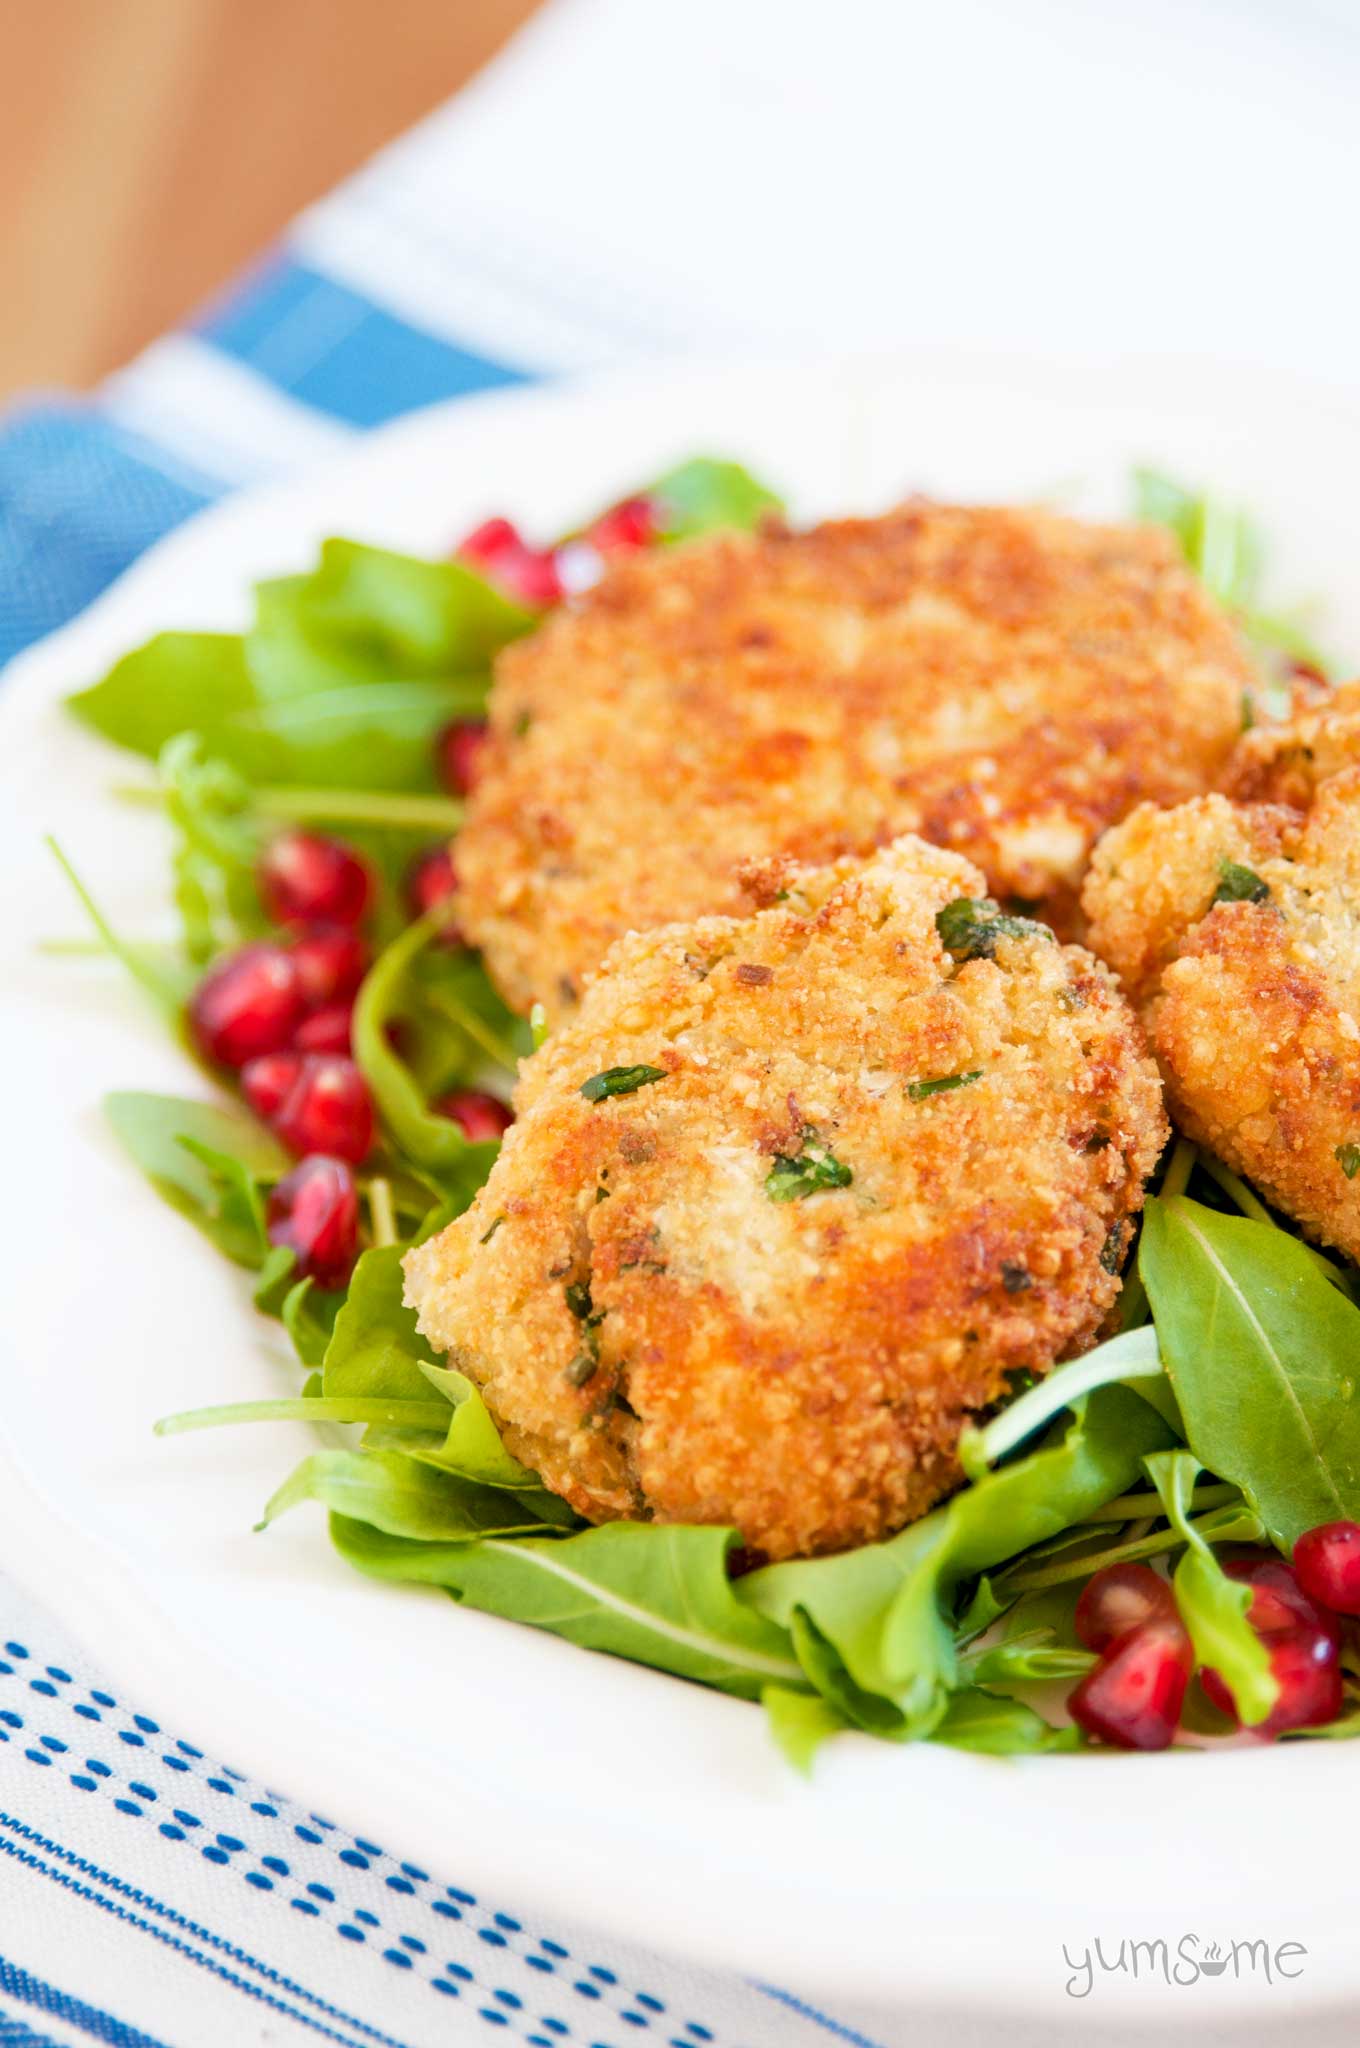 easy quinoa and cheese patties | yumsome.com